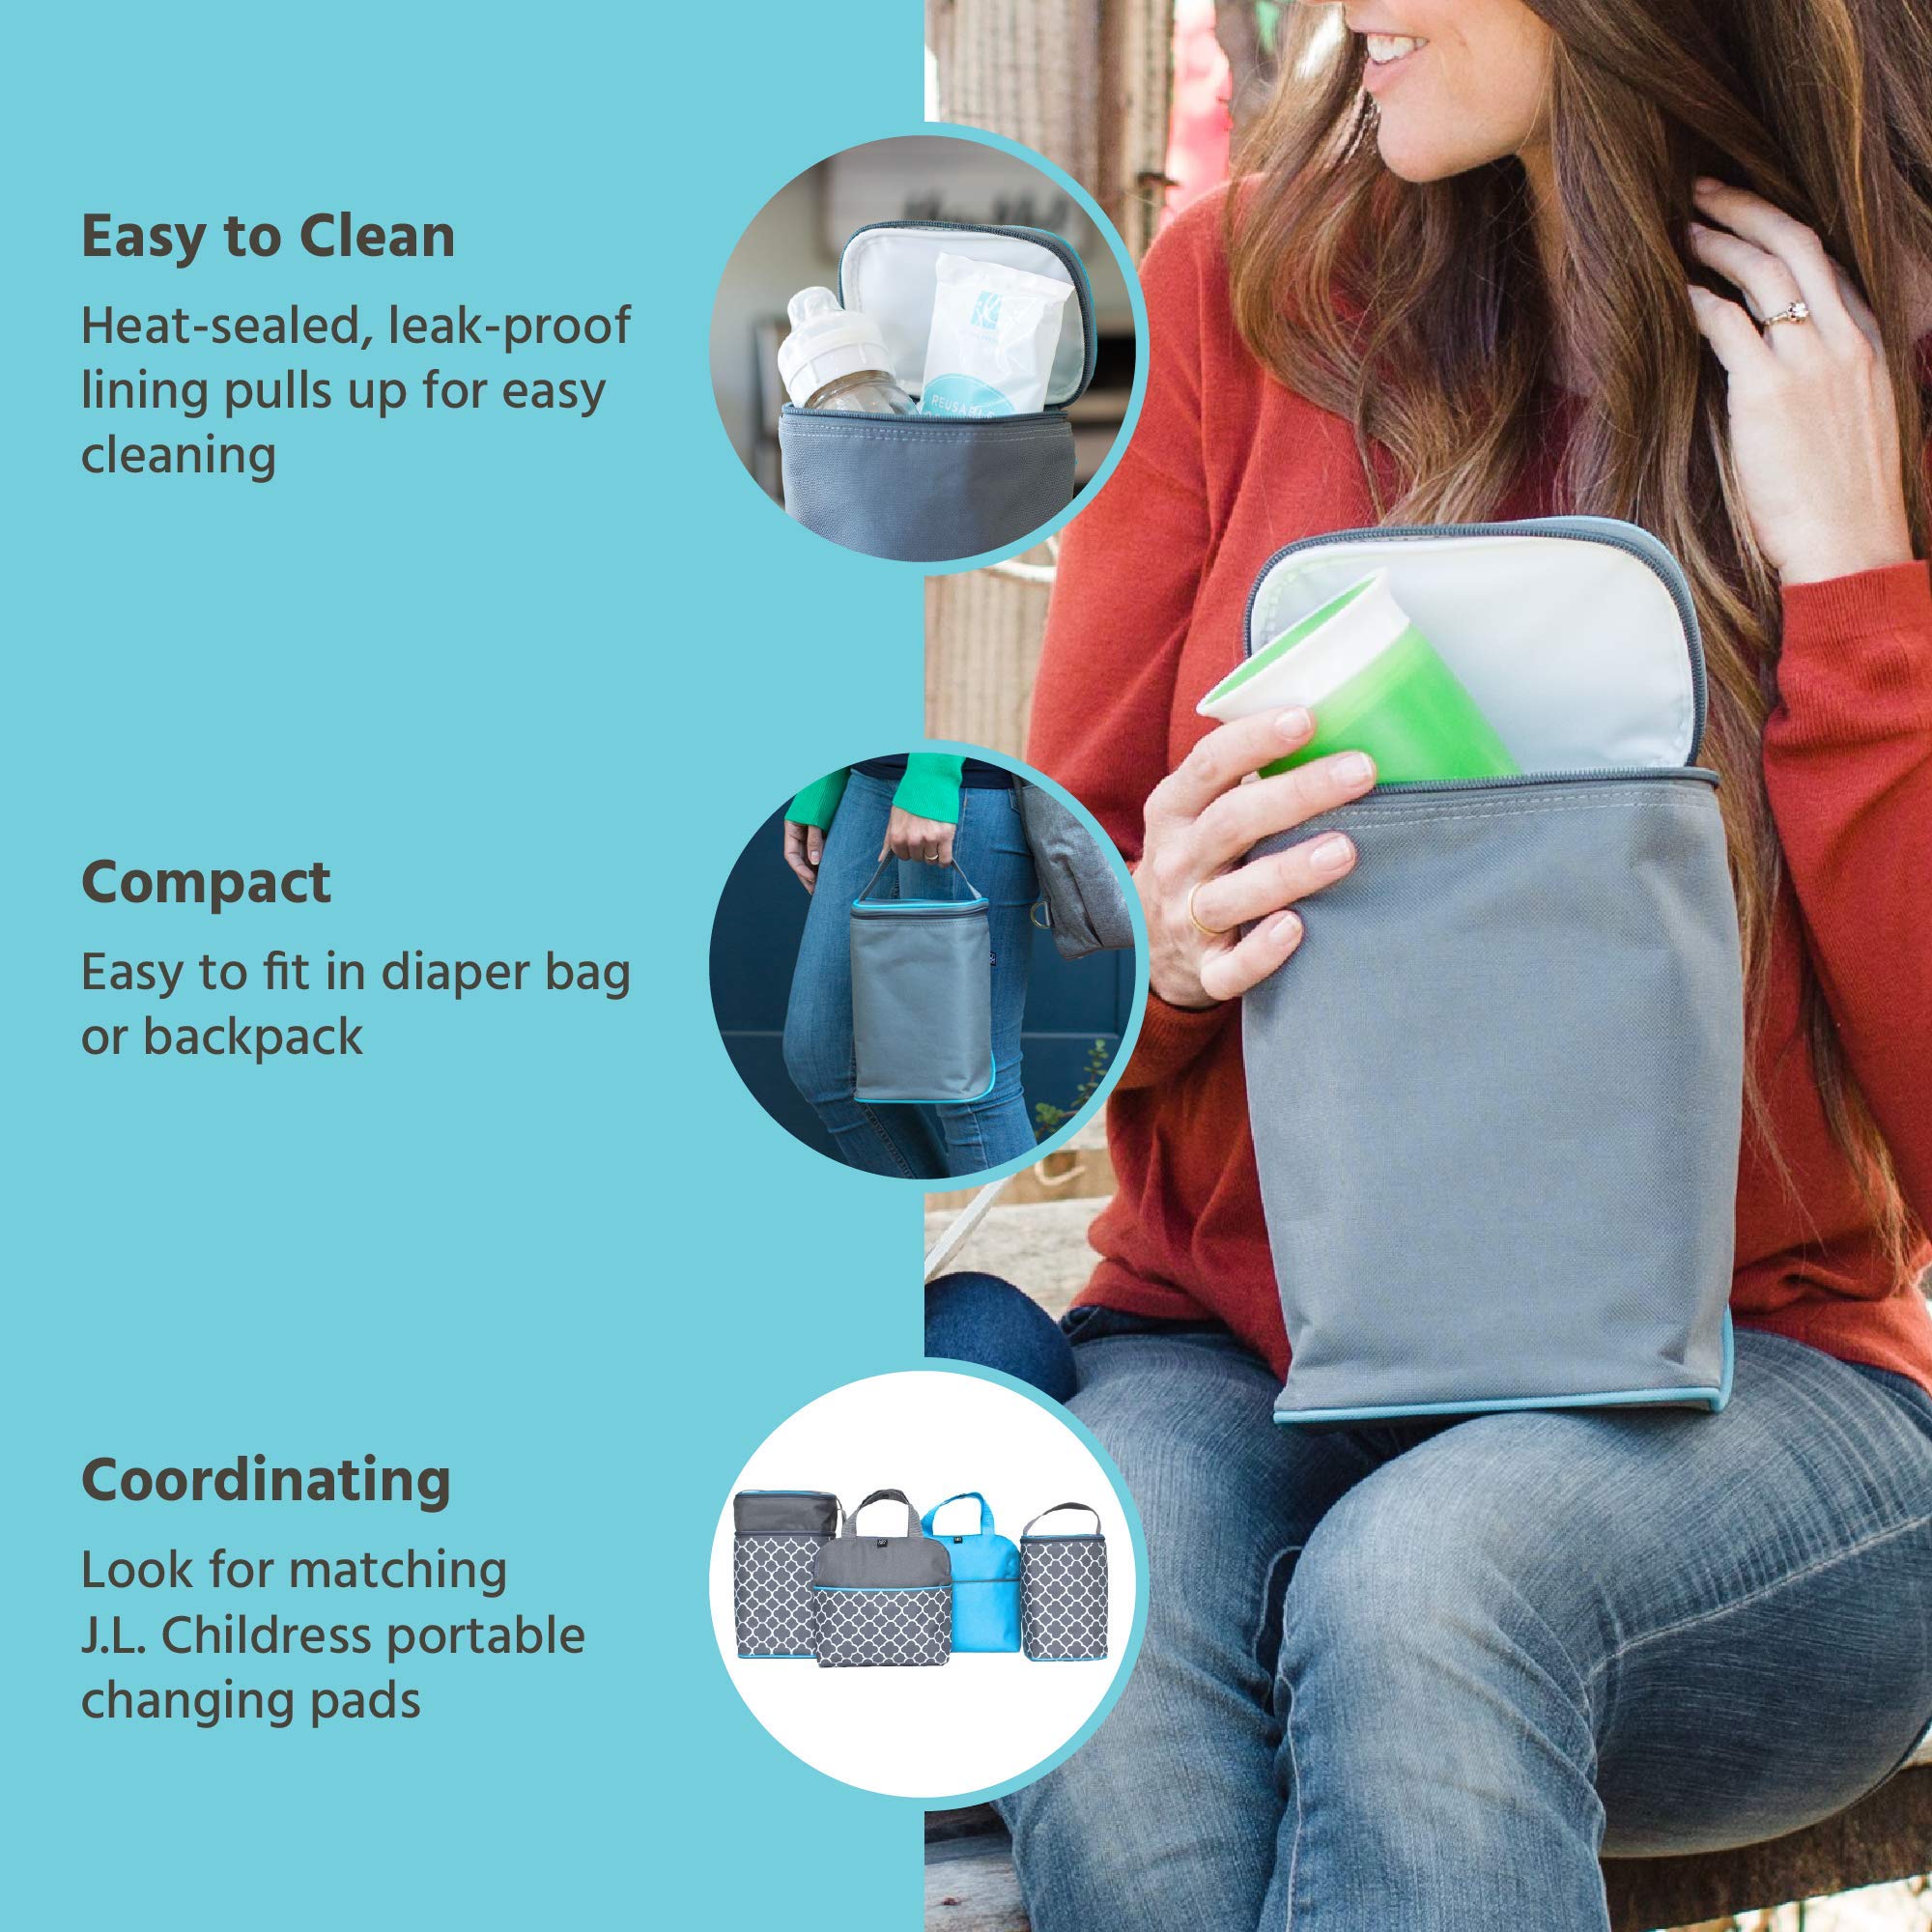 J.L. Childress Tall Twocool, Breastmilk Cooler, Baby Bottle & Baby Food Bag, Insulated & Leak Proof, Ice Pack Included, Fits 2-4 Bottles, Grey/Teal Clover (0407GY-CL)